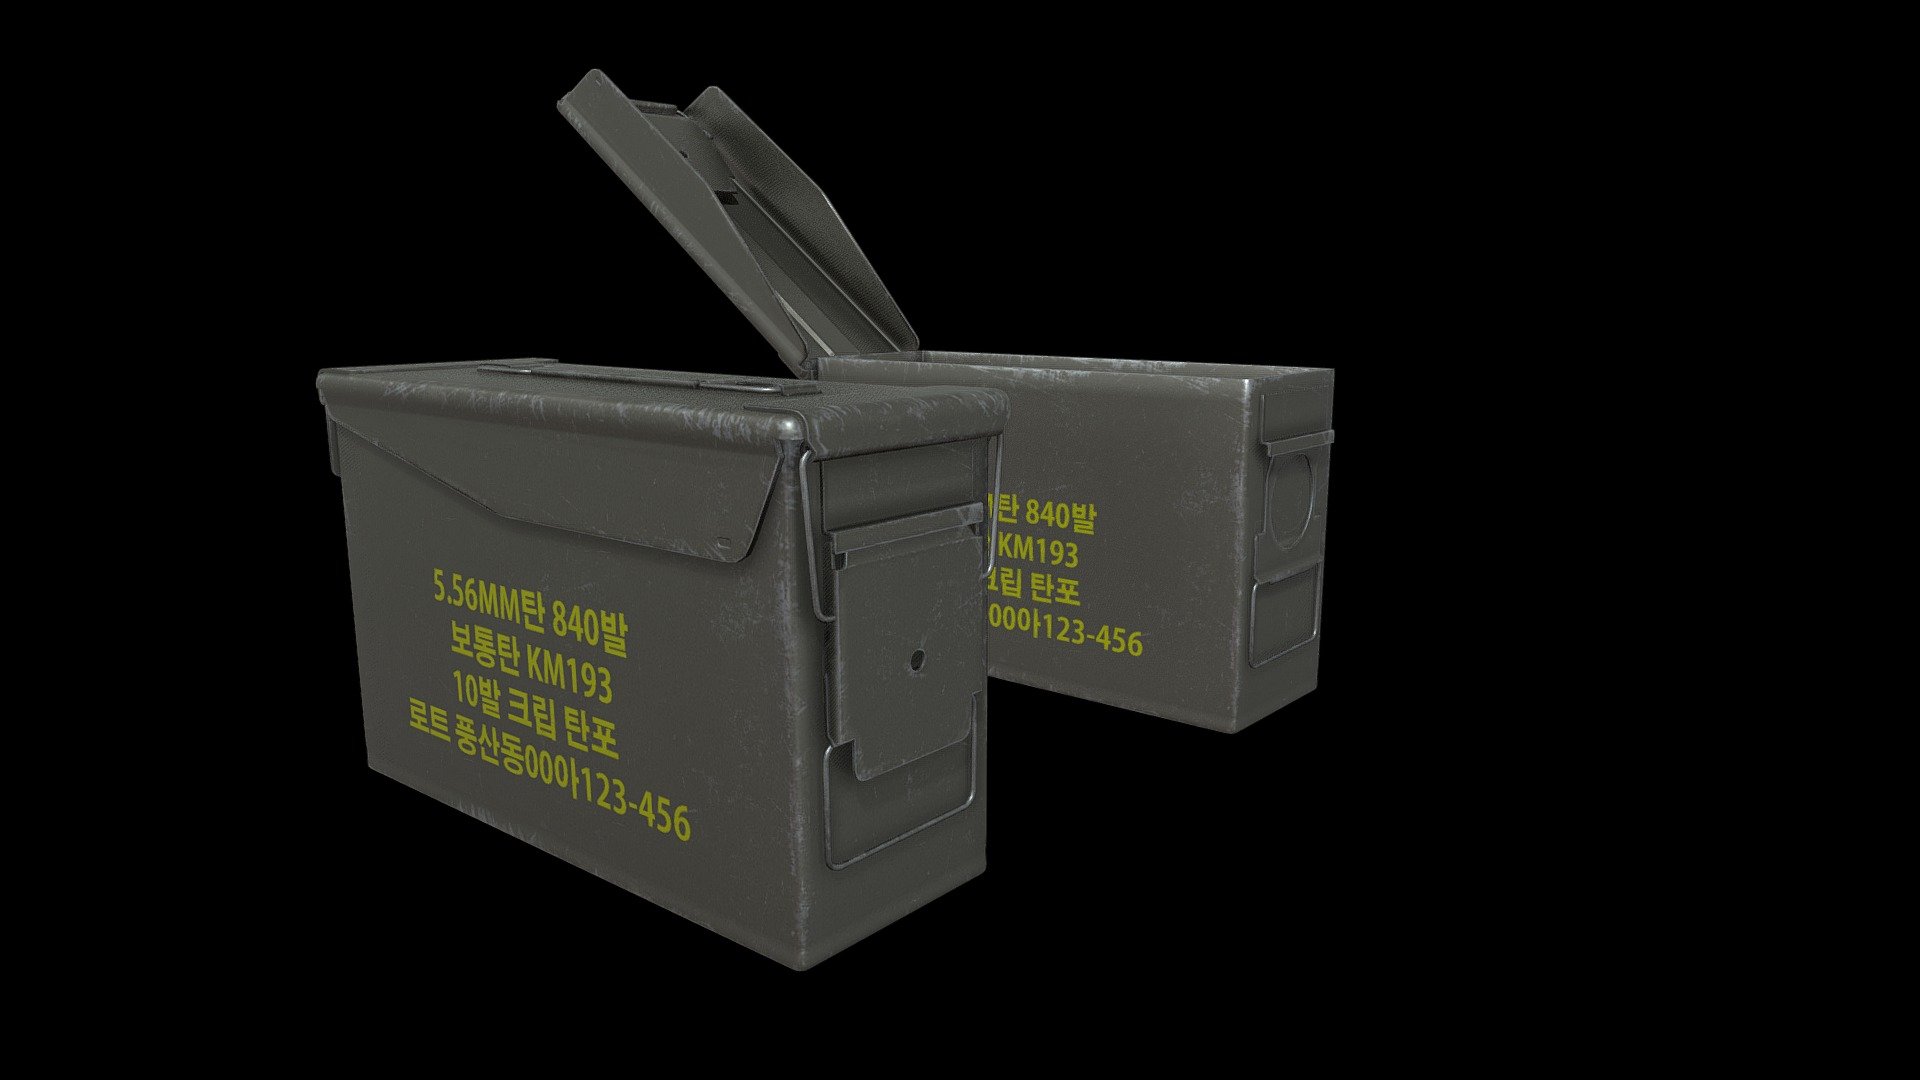 Used by Republic of Korea's Army.

Texture Size : 2048x2048

Texture : BaseColor, Normal, Metallic, Roughness, AO 3d model